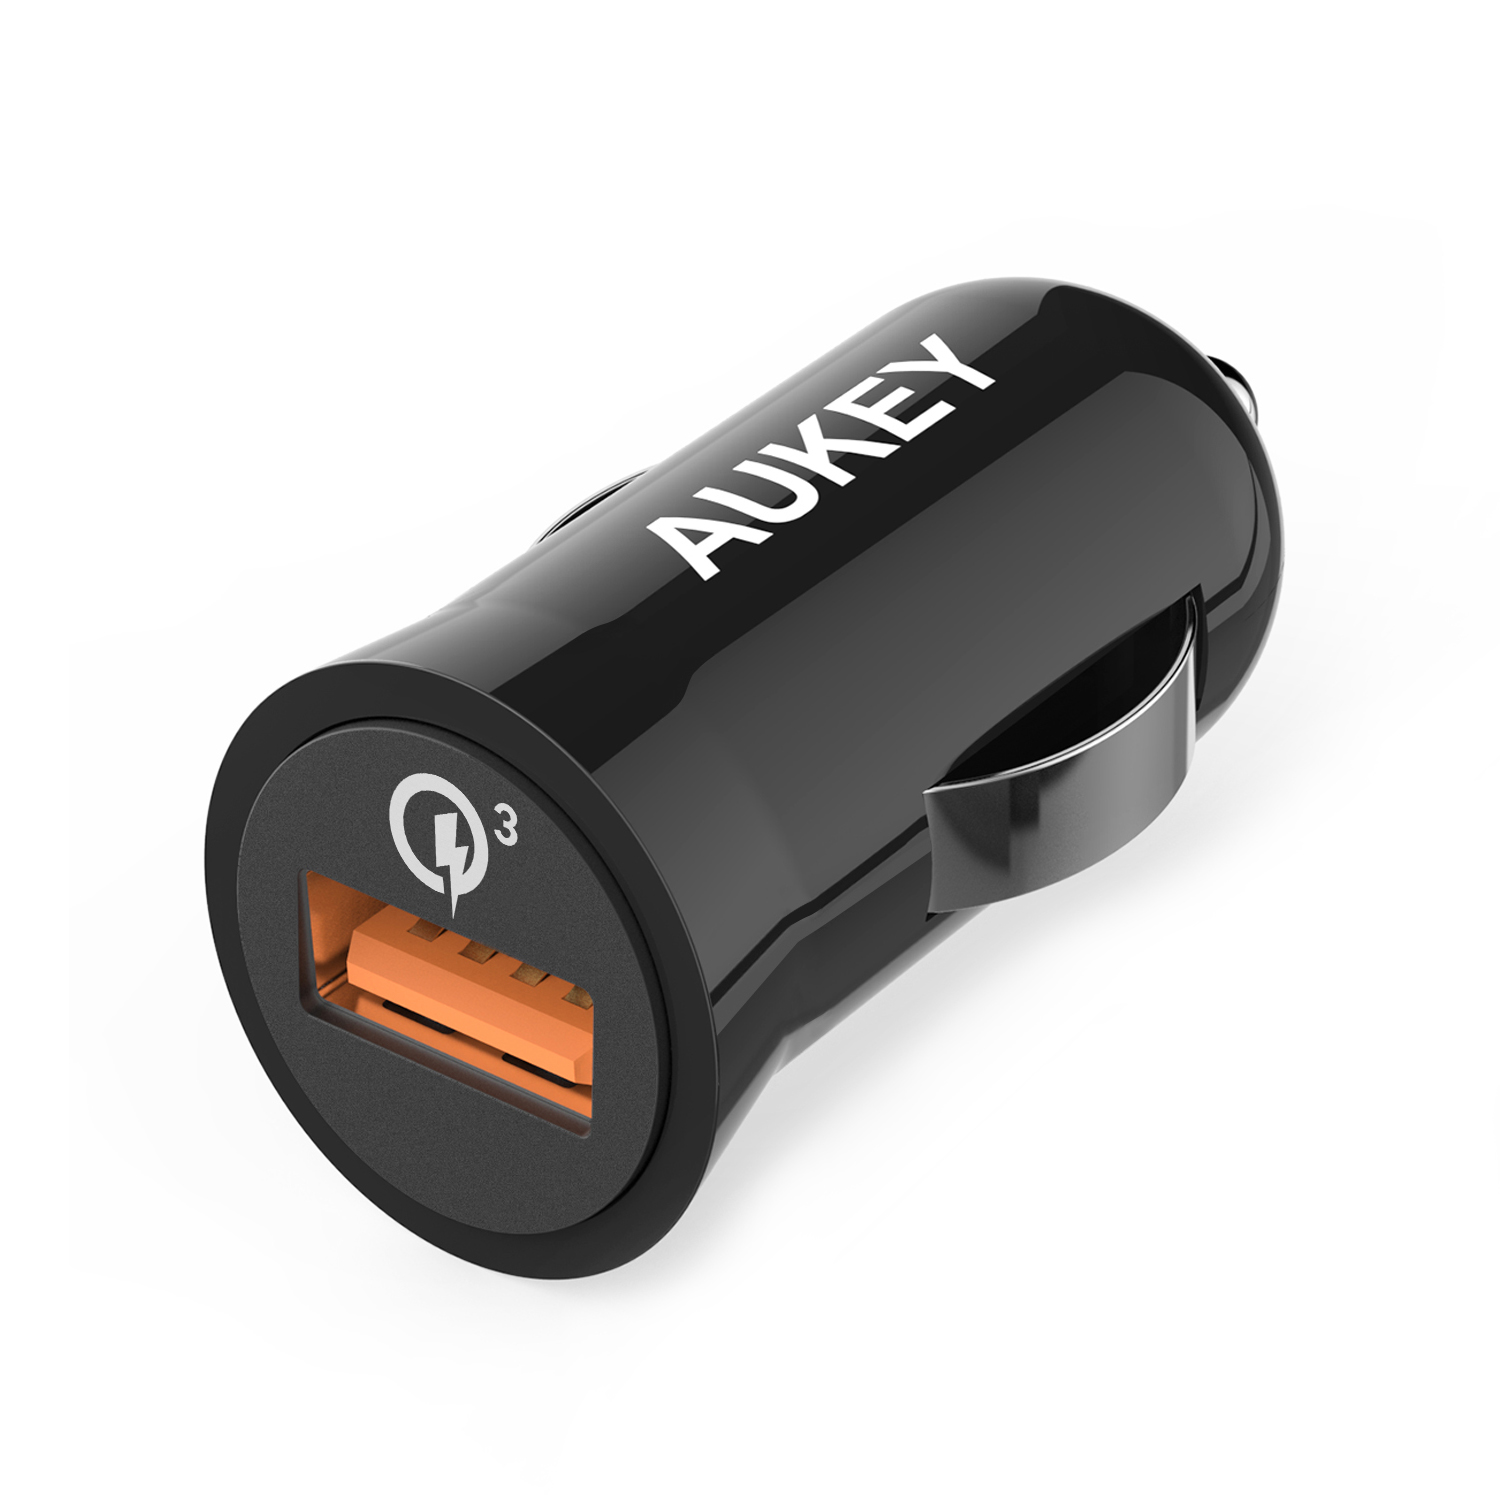 AUKEY 1-Port 18W Car Charger with QC 3.0